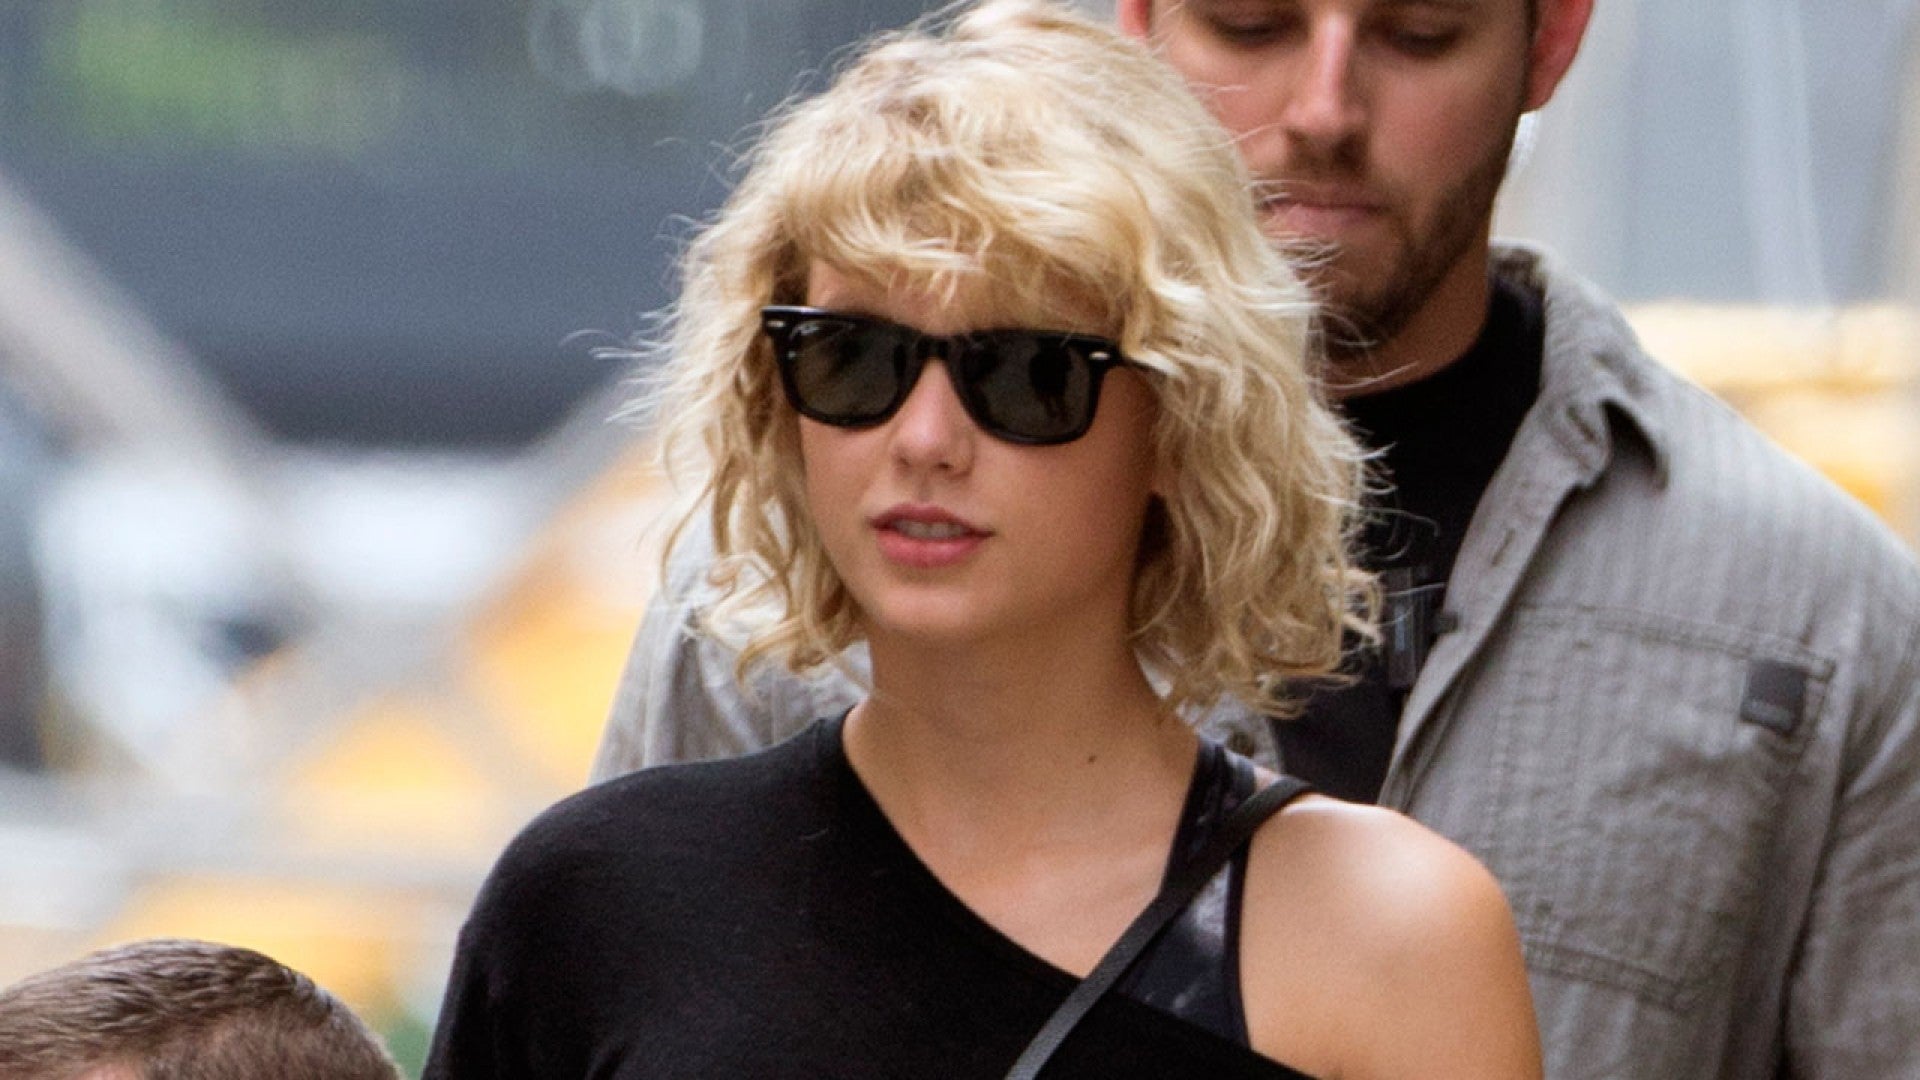 taylor swift with curly hair 2022